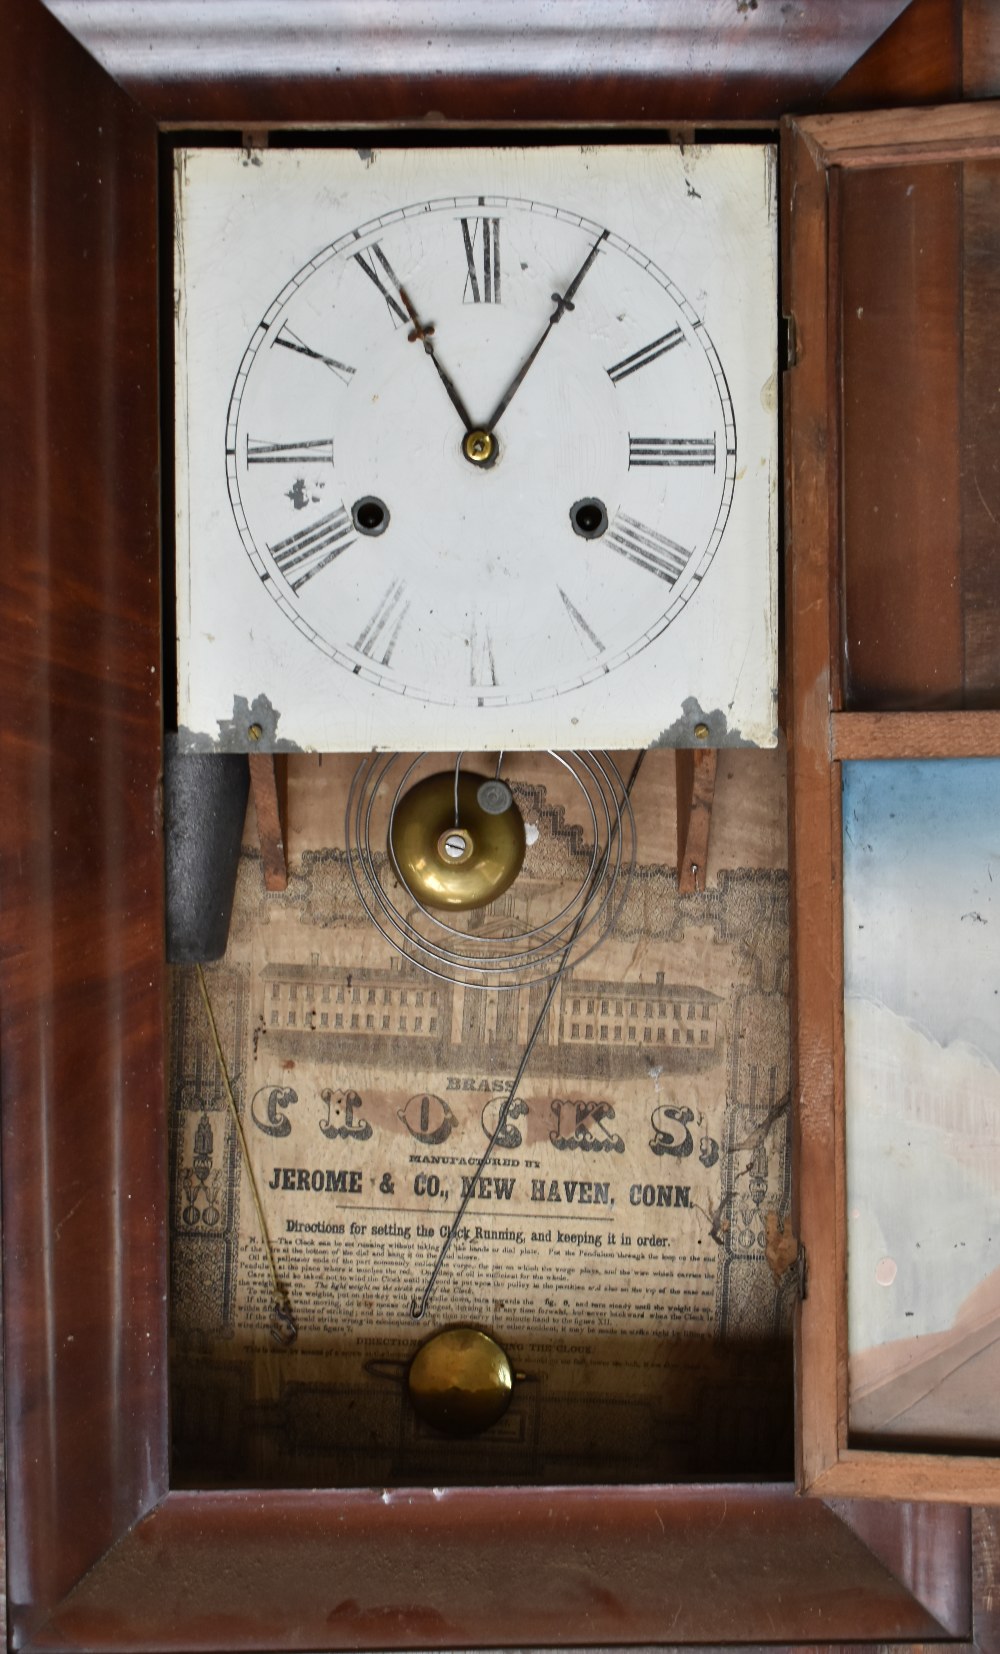 JEROME & CO OF NEW HAVEN, CONN. USA; a late 19th century American mahogany veneered ogee wall clock, - Image 2 of 9